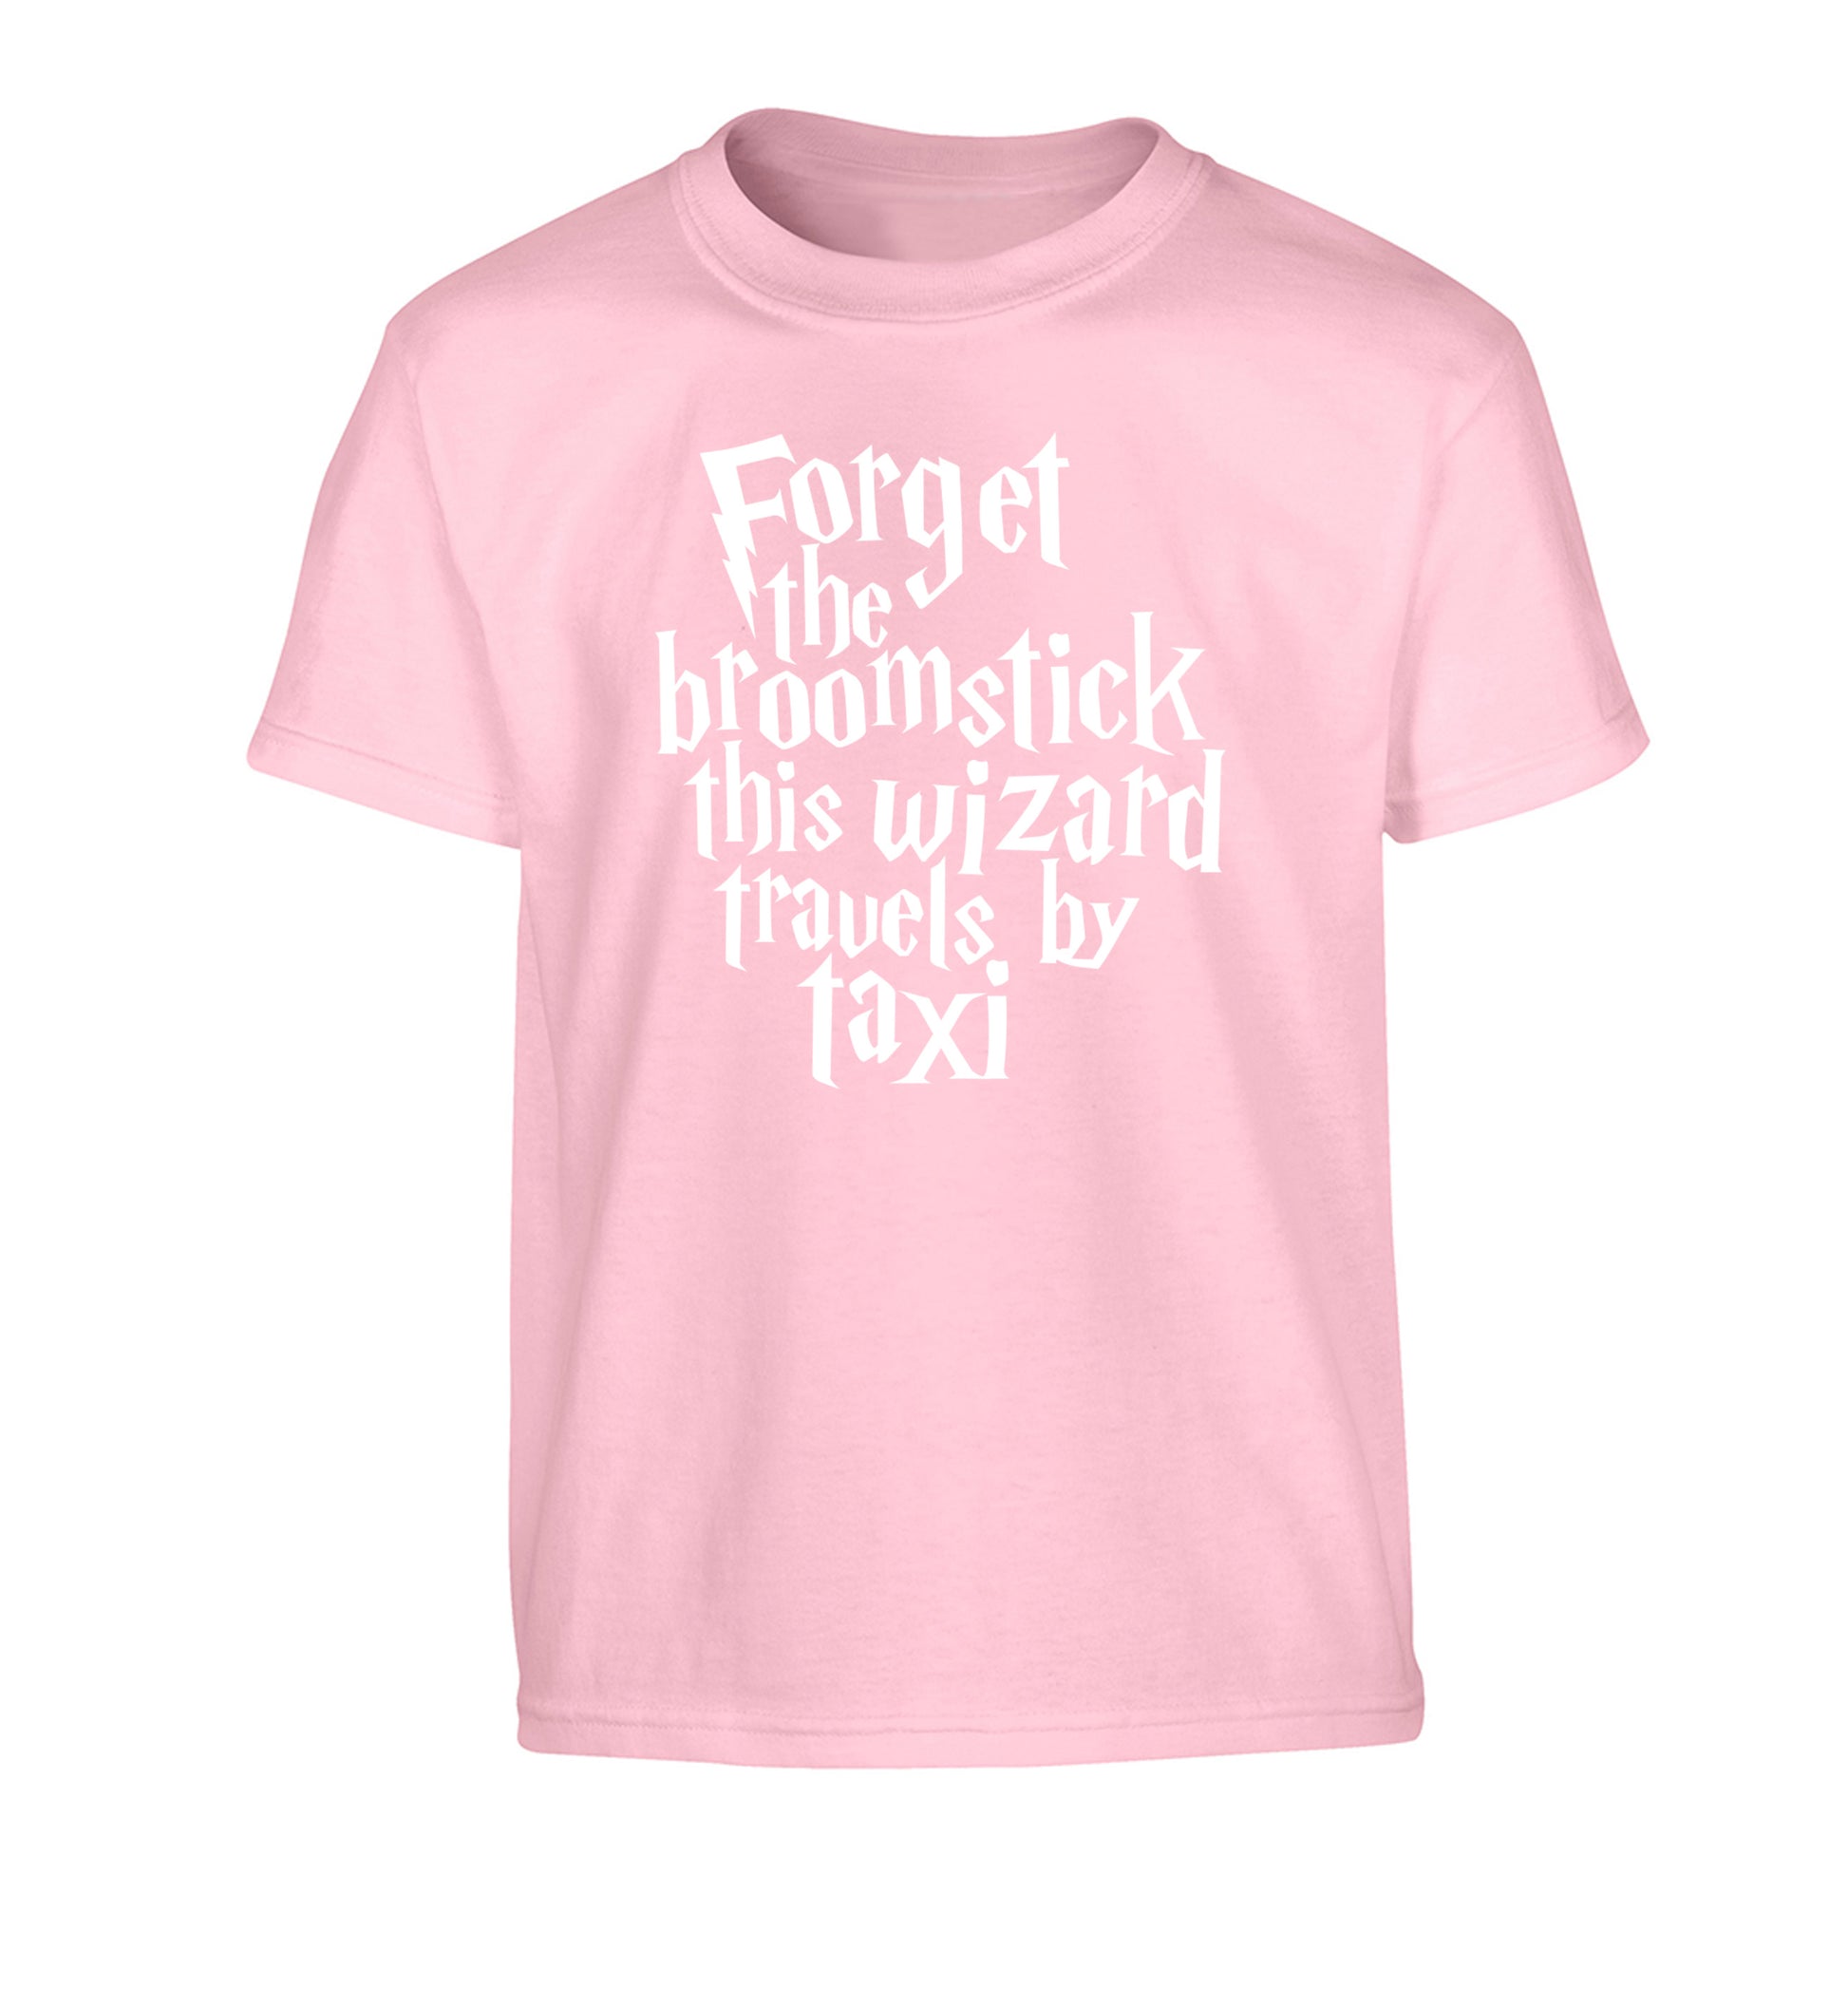 Forget the broomstick this wizard travels by taxi Children's light pink Tshirt 12-14 Years